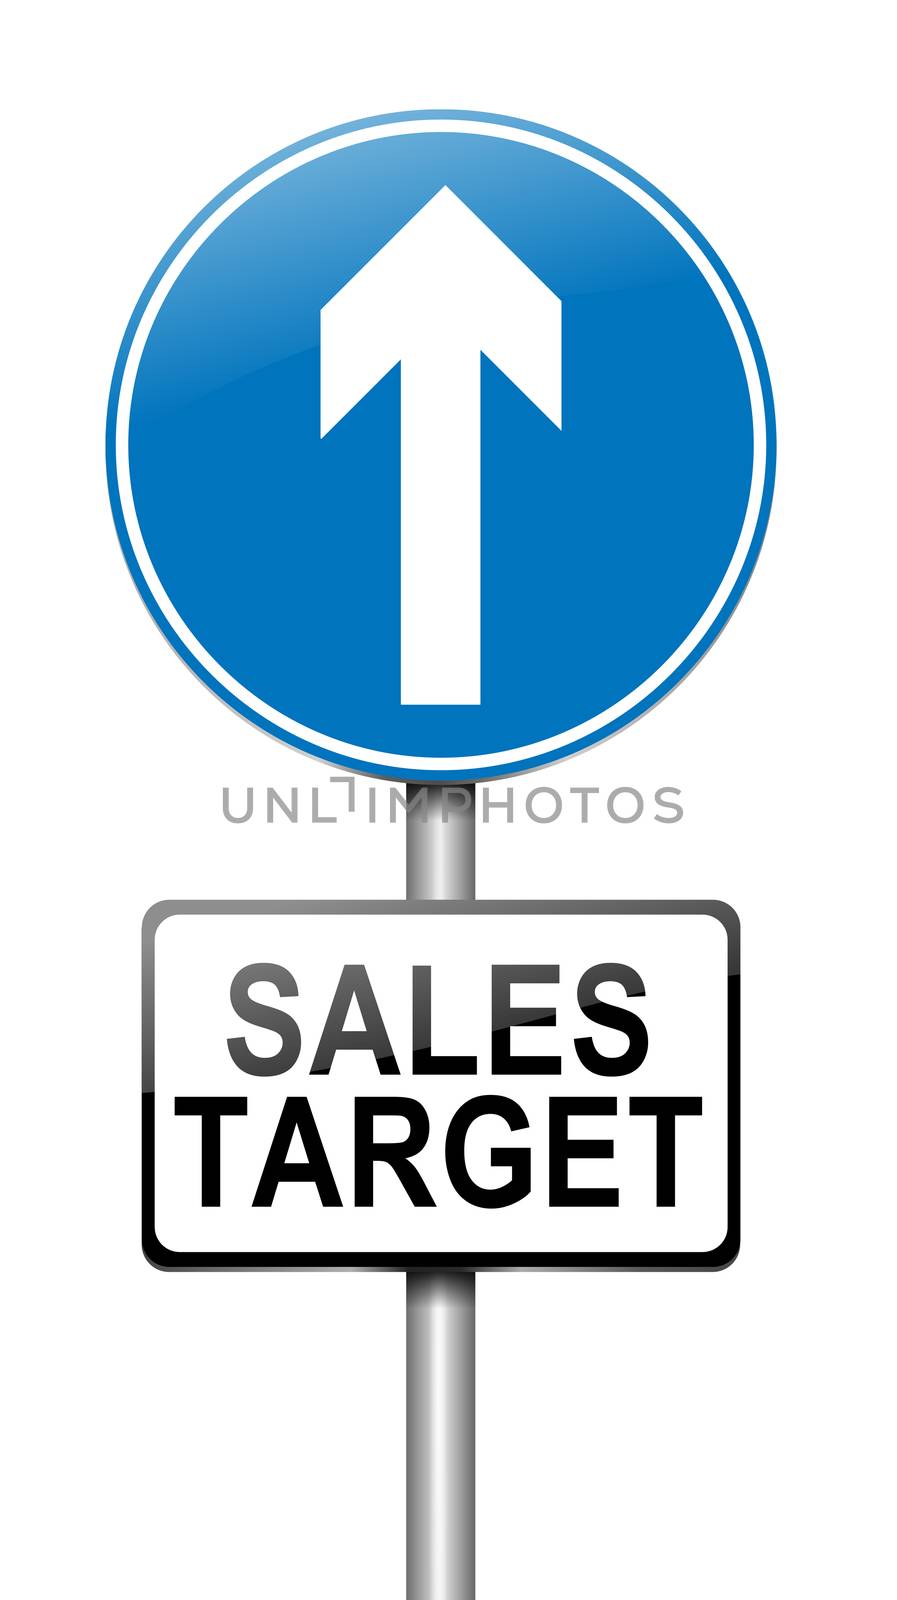 Illustration depicting a sign with a sales target concept.